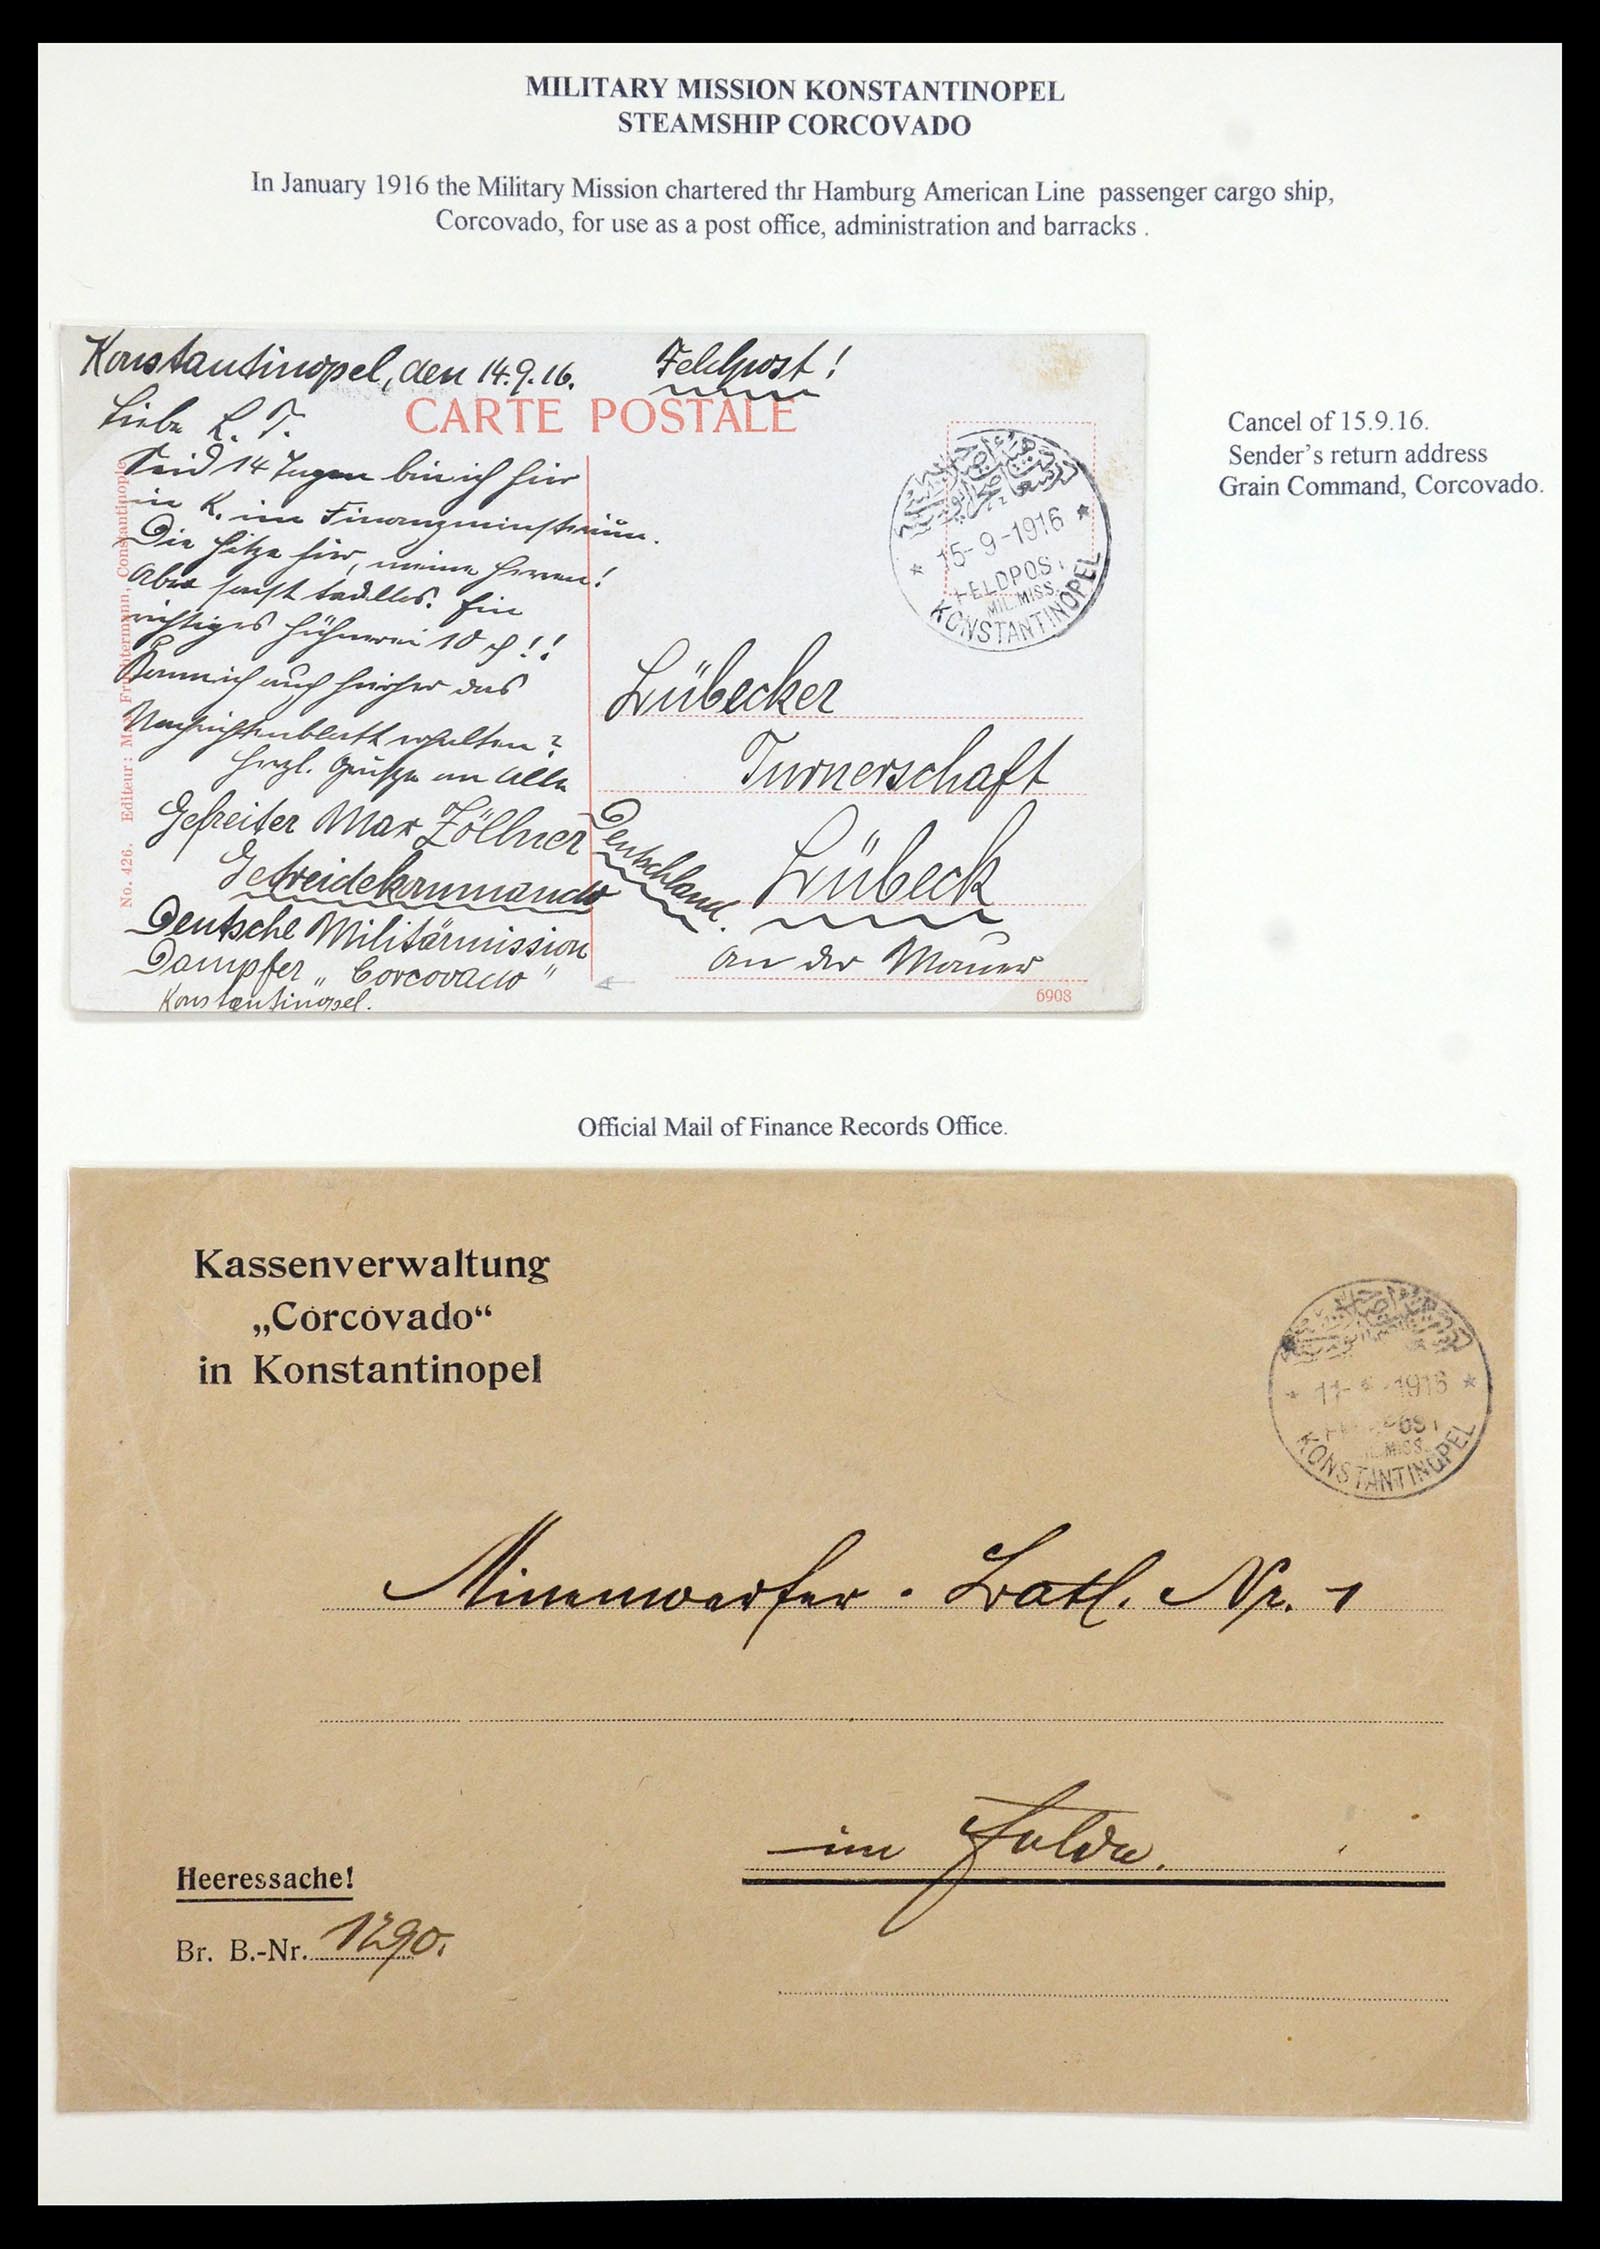 35515 118 - Stamp Collection 35515 Germany covers og Military mission in Turkey 1914